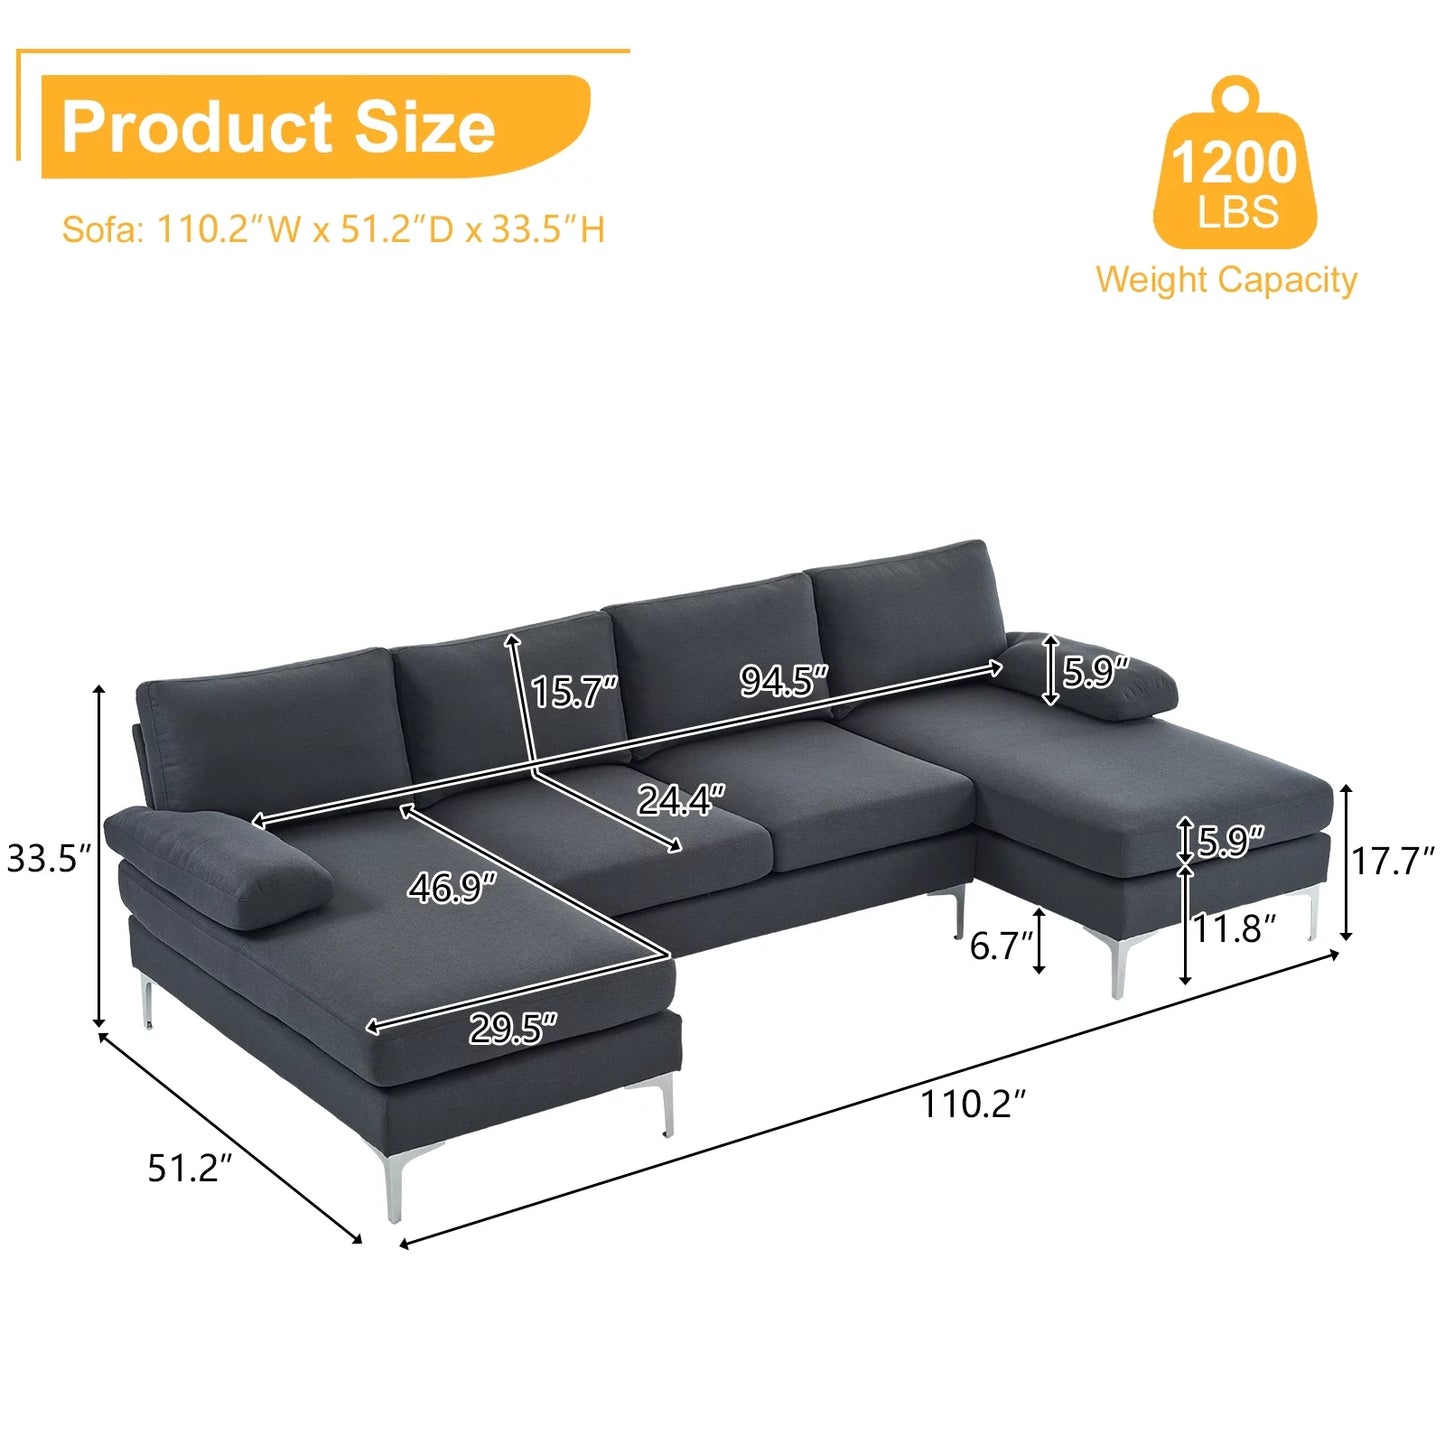 Sectional Sofa, U-Shape Convertible Couch Set with Soft Linen Fabric, Lounge Sleeper with Chaise for Living Room 4 Seat Dark Gray - Design By Technique